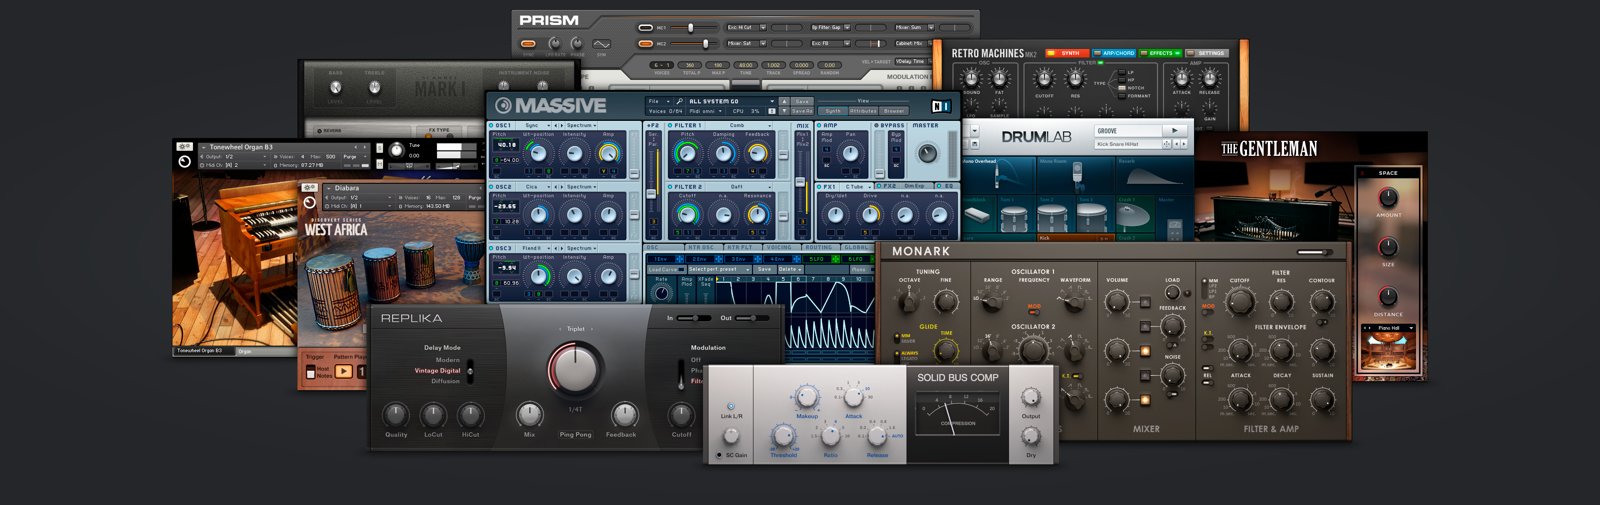 what vst voices are included in komplete ultimate 11